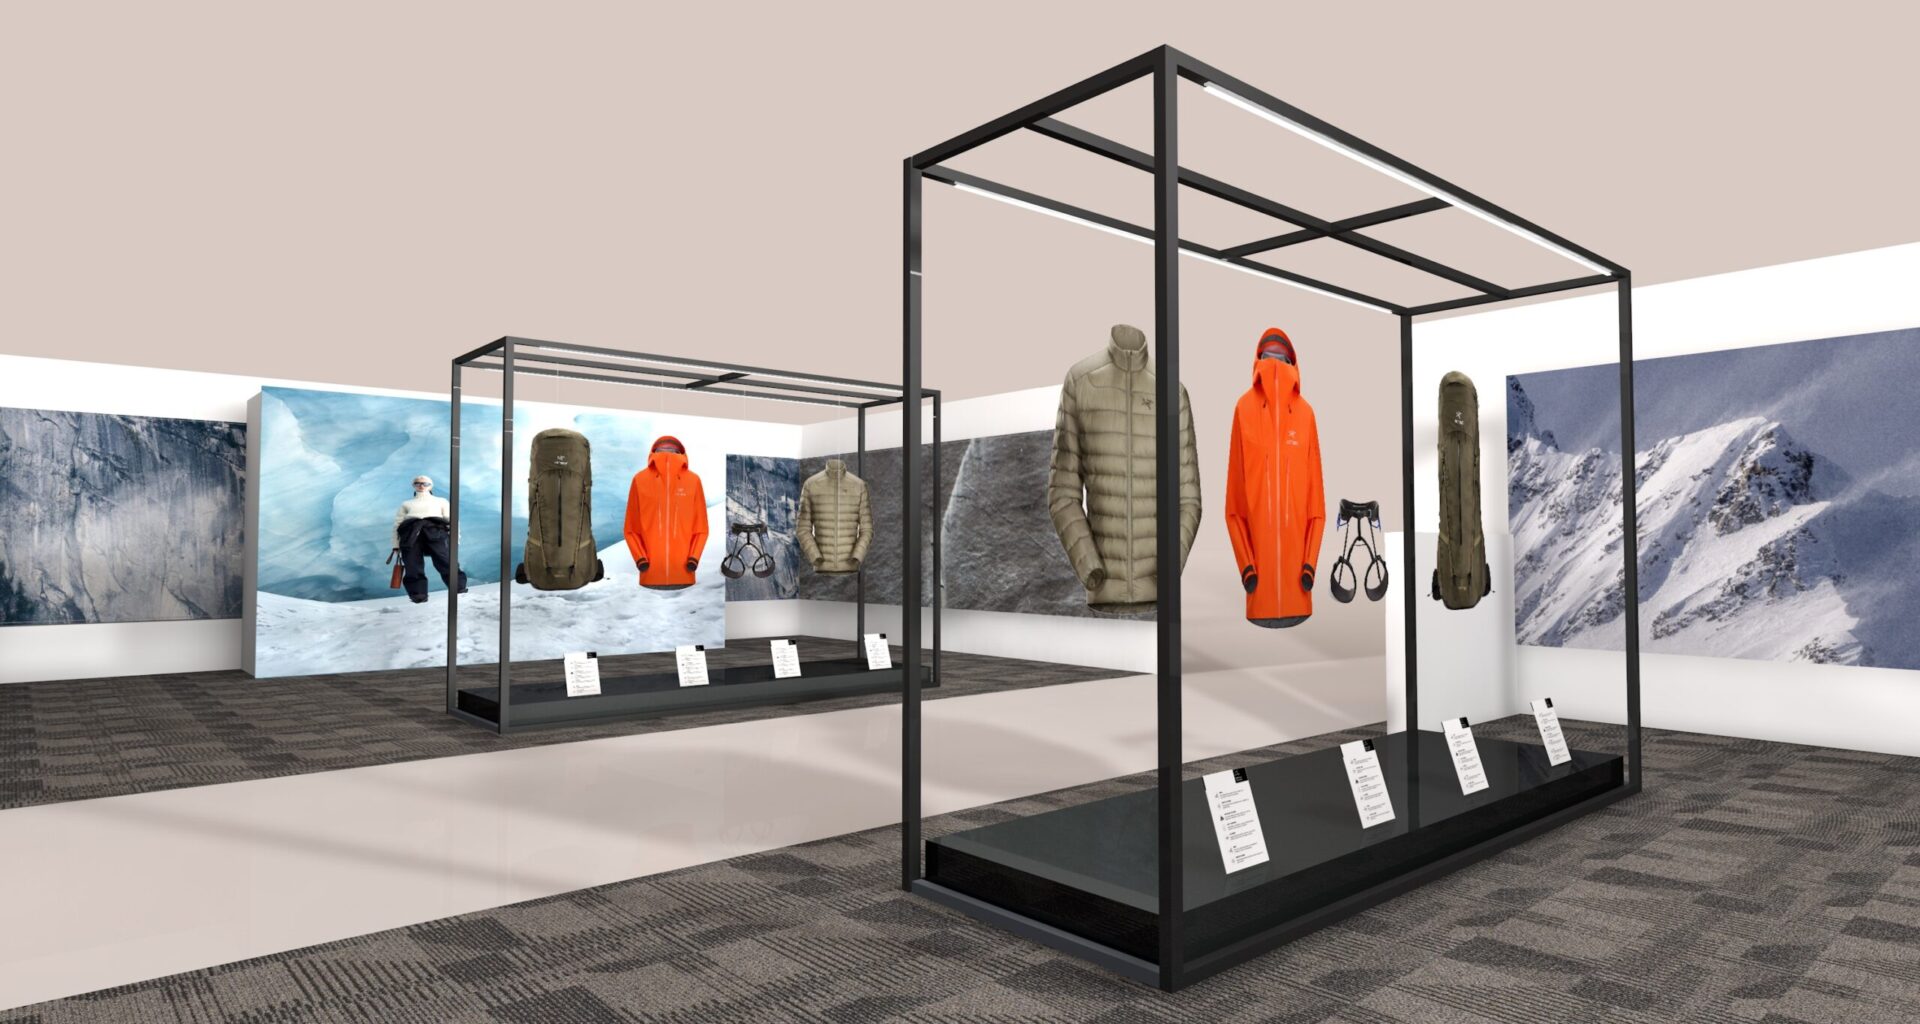 Digital render of Arc'teryx trade show booth with glass product showcase